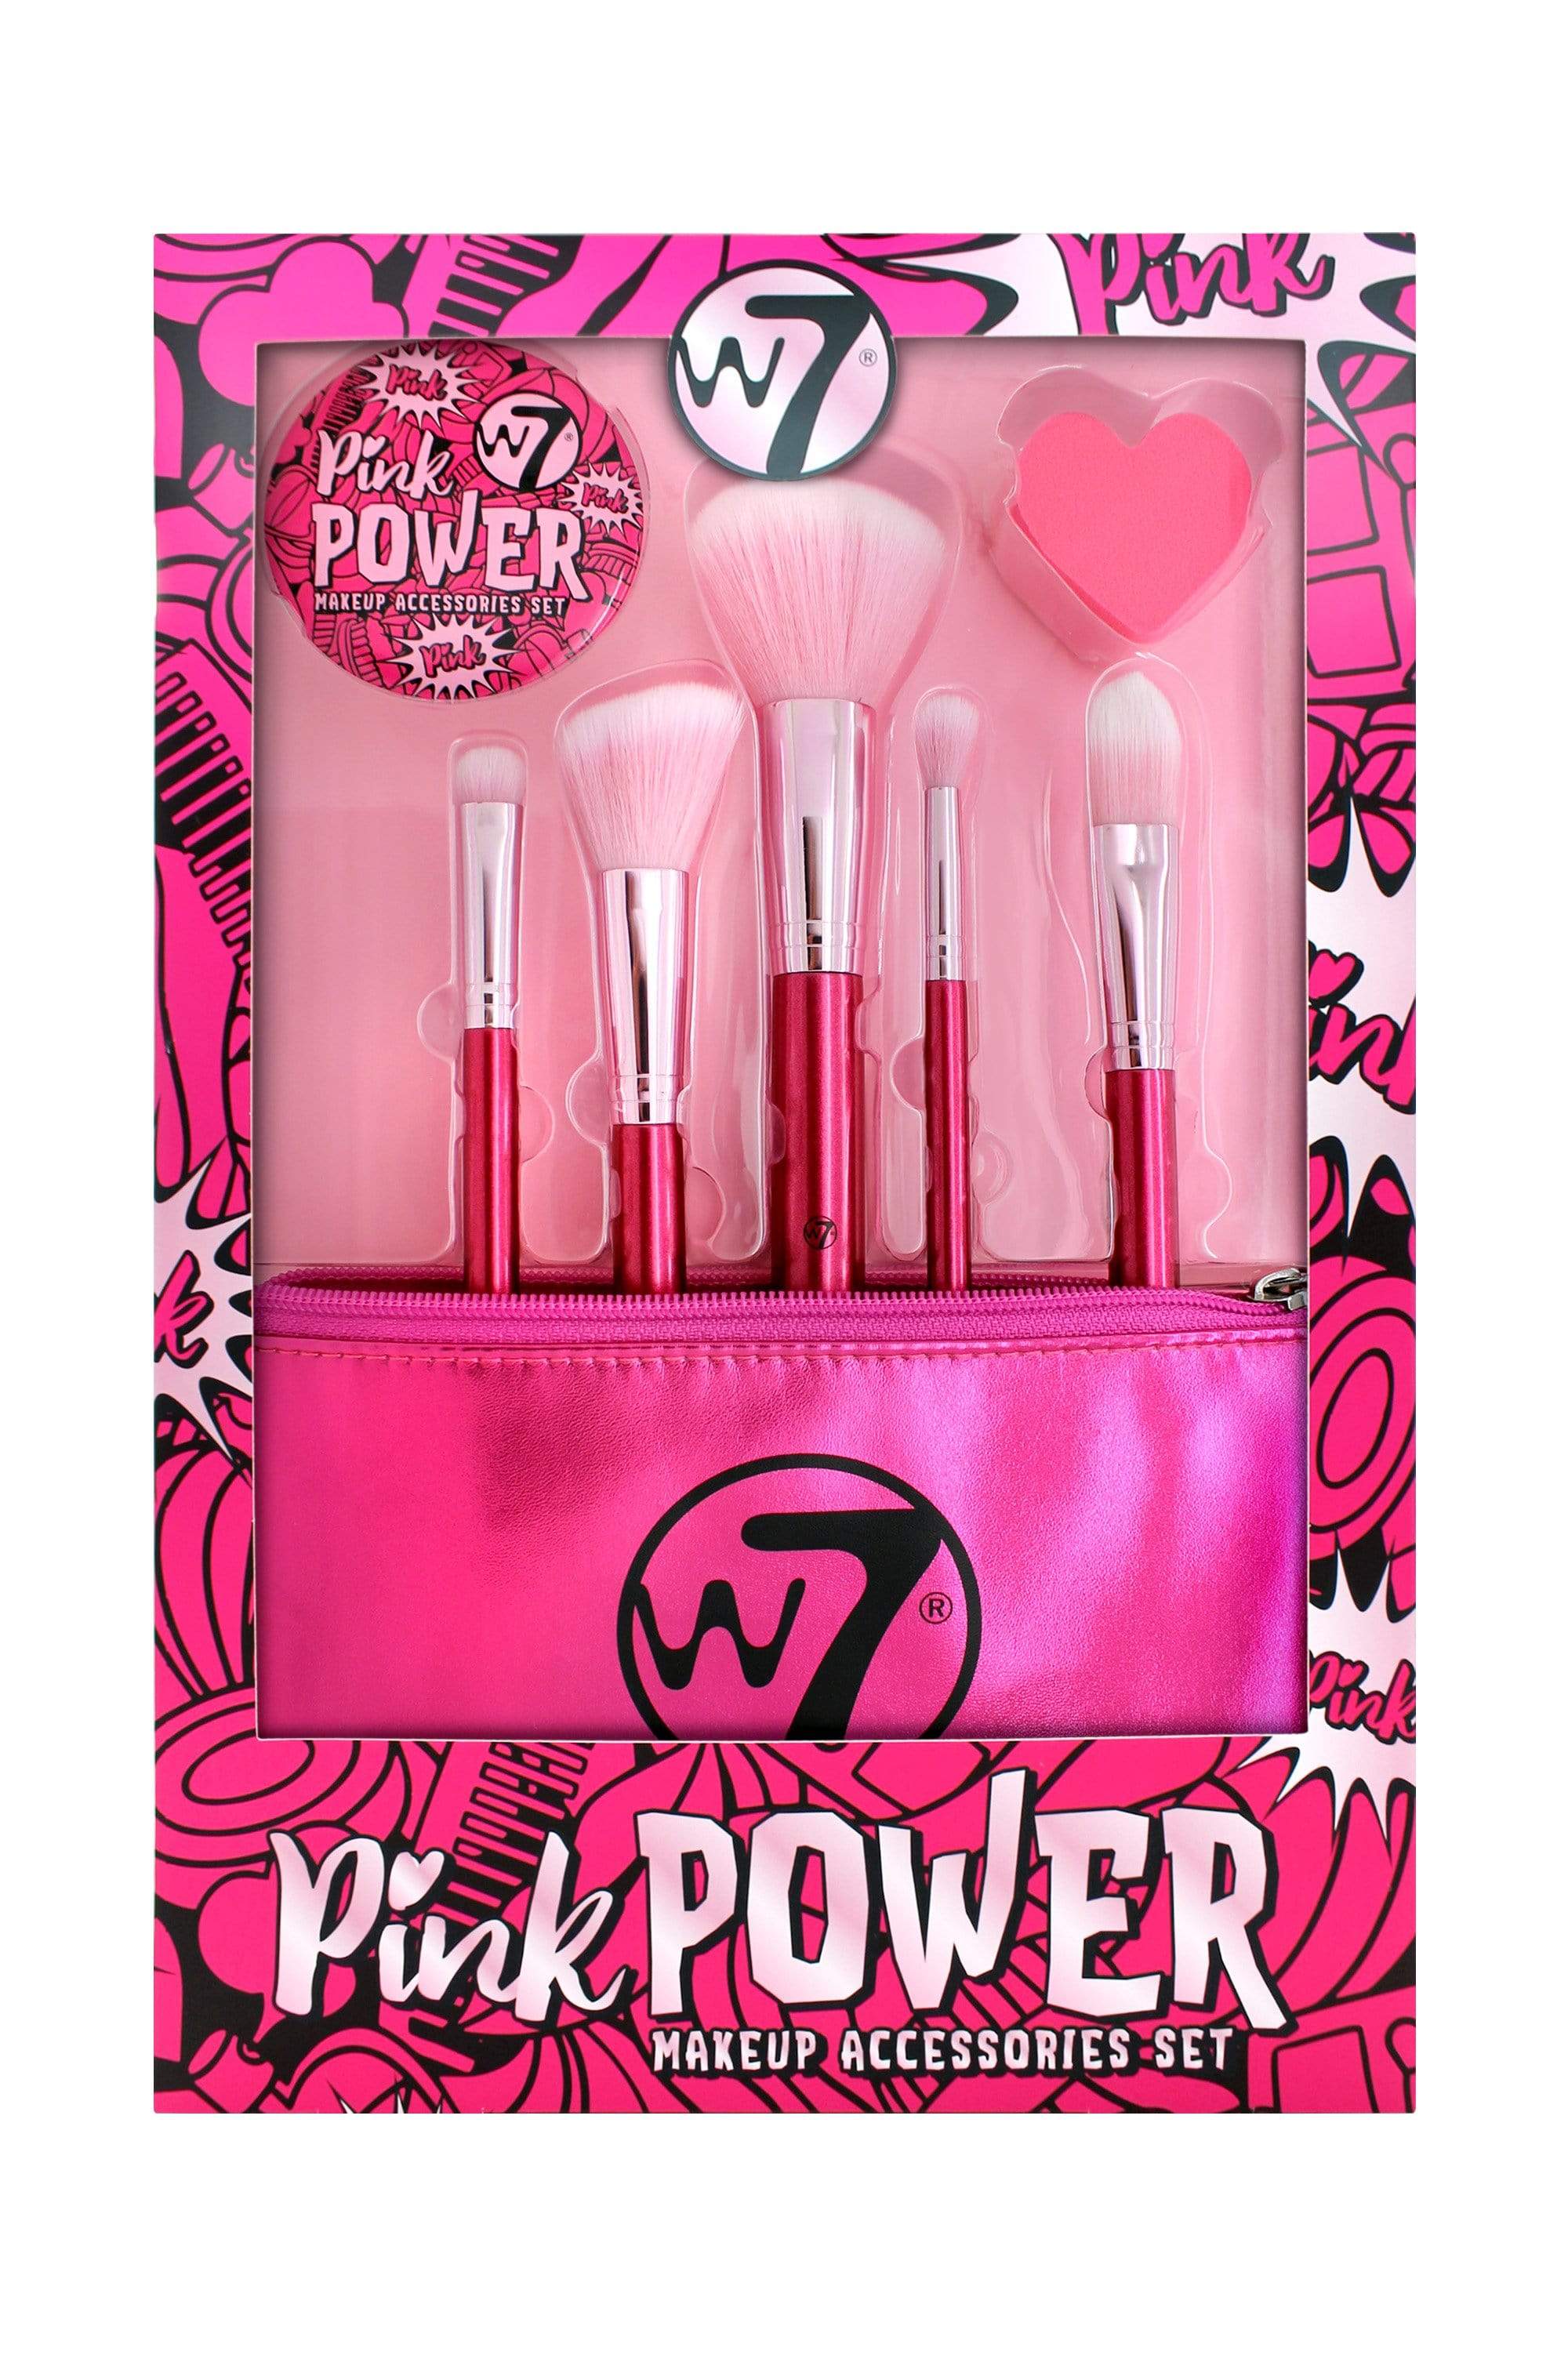 Buy W7 Pink Power Makeup Accessories Set | cosmeticsdiarypk 100% Original Beauty Products